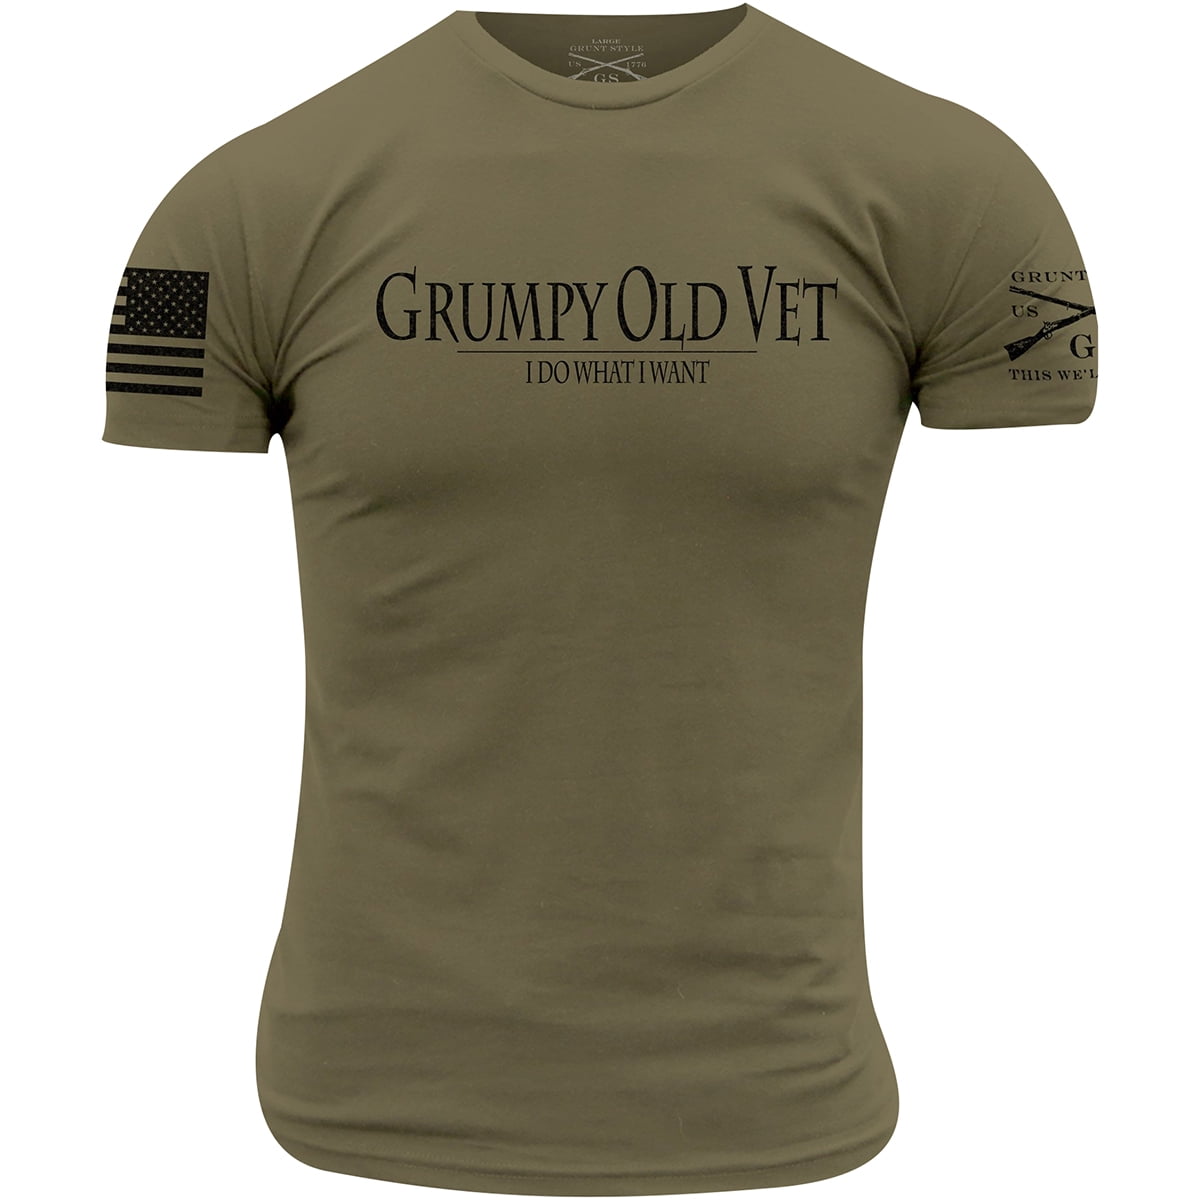 Men's grunt style shirts are known for their patriotic and military-inspired designs that make a bold statement.